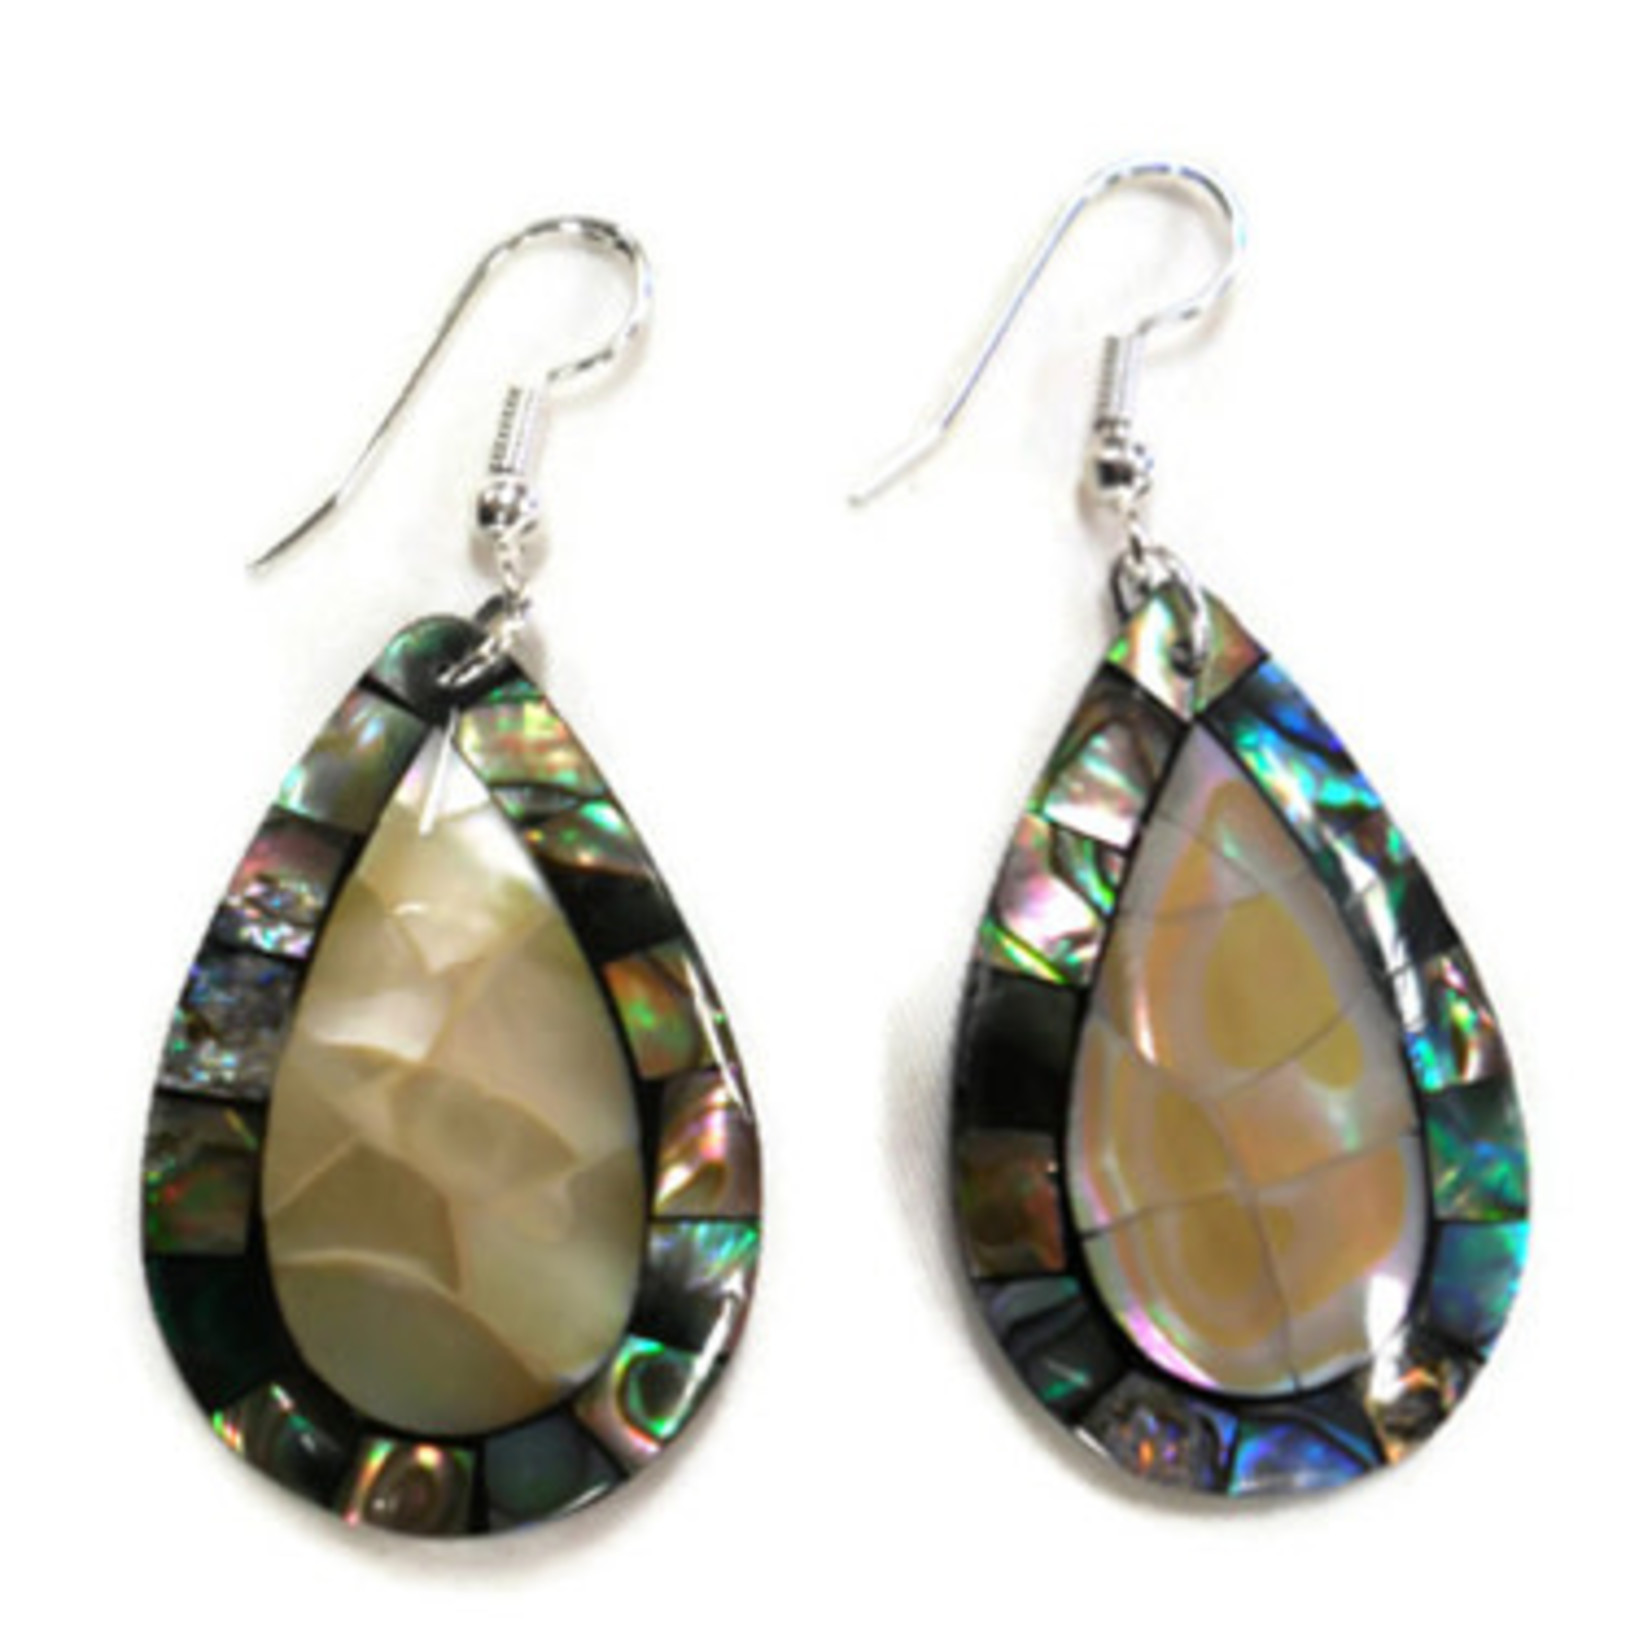 EA165 Shell Earrings Paua Raindrop with Mother of Pearl Inlay